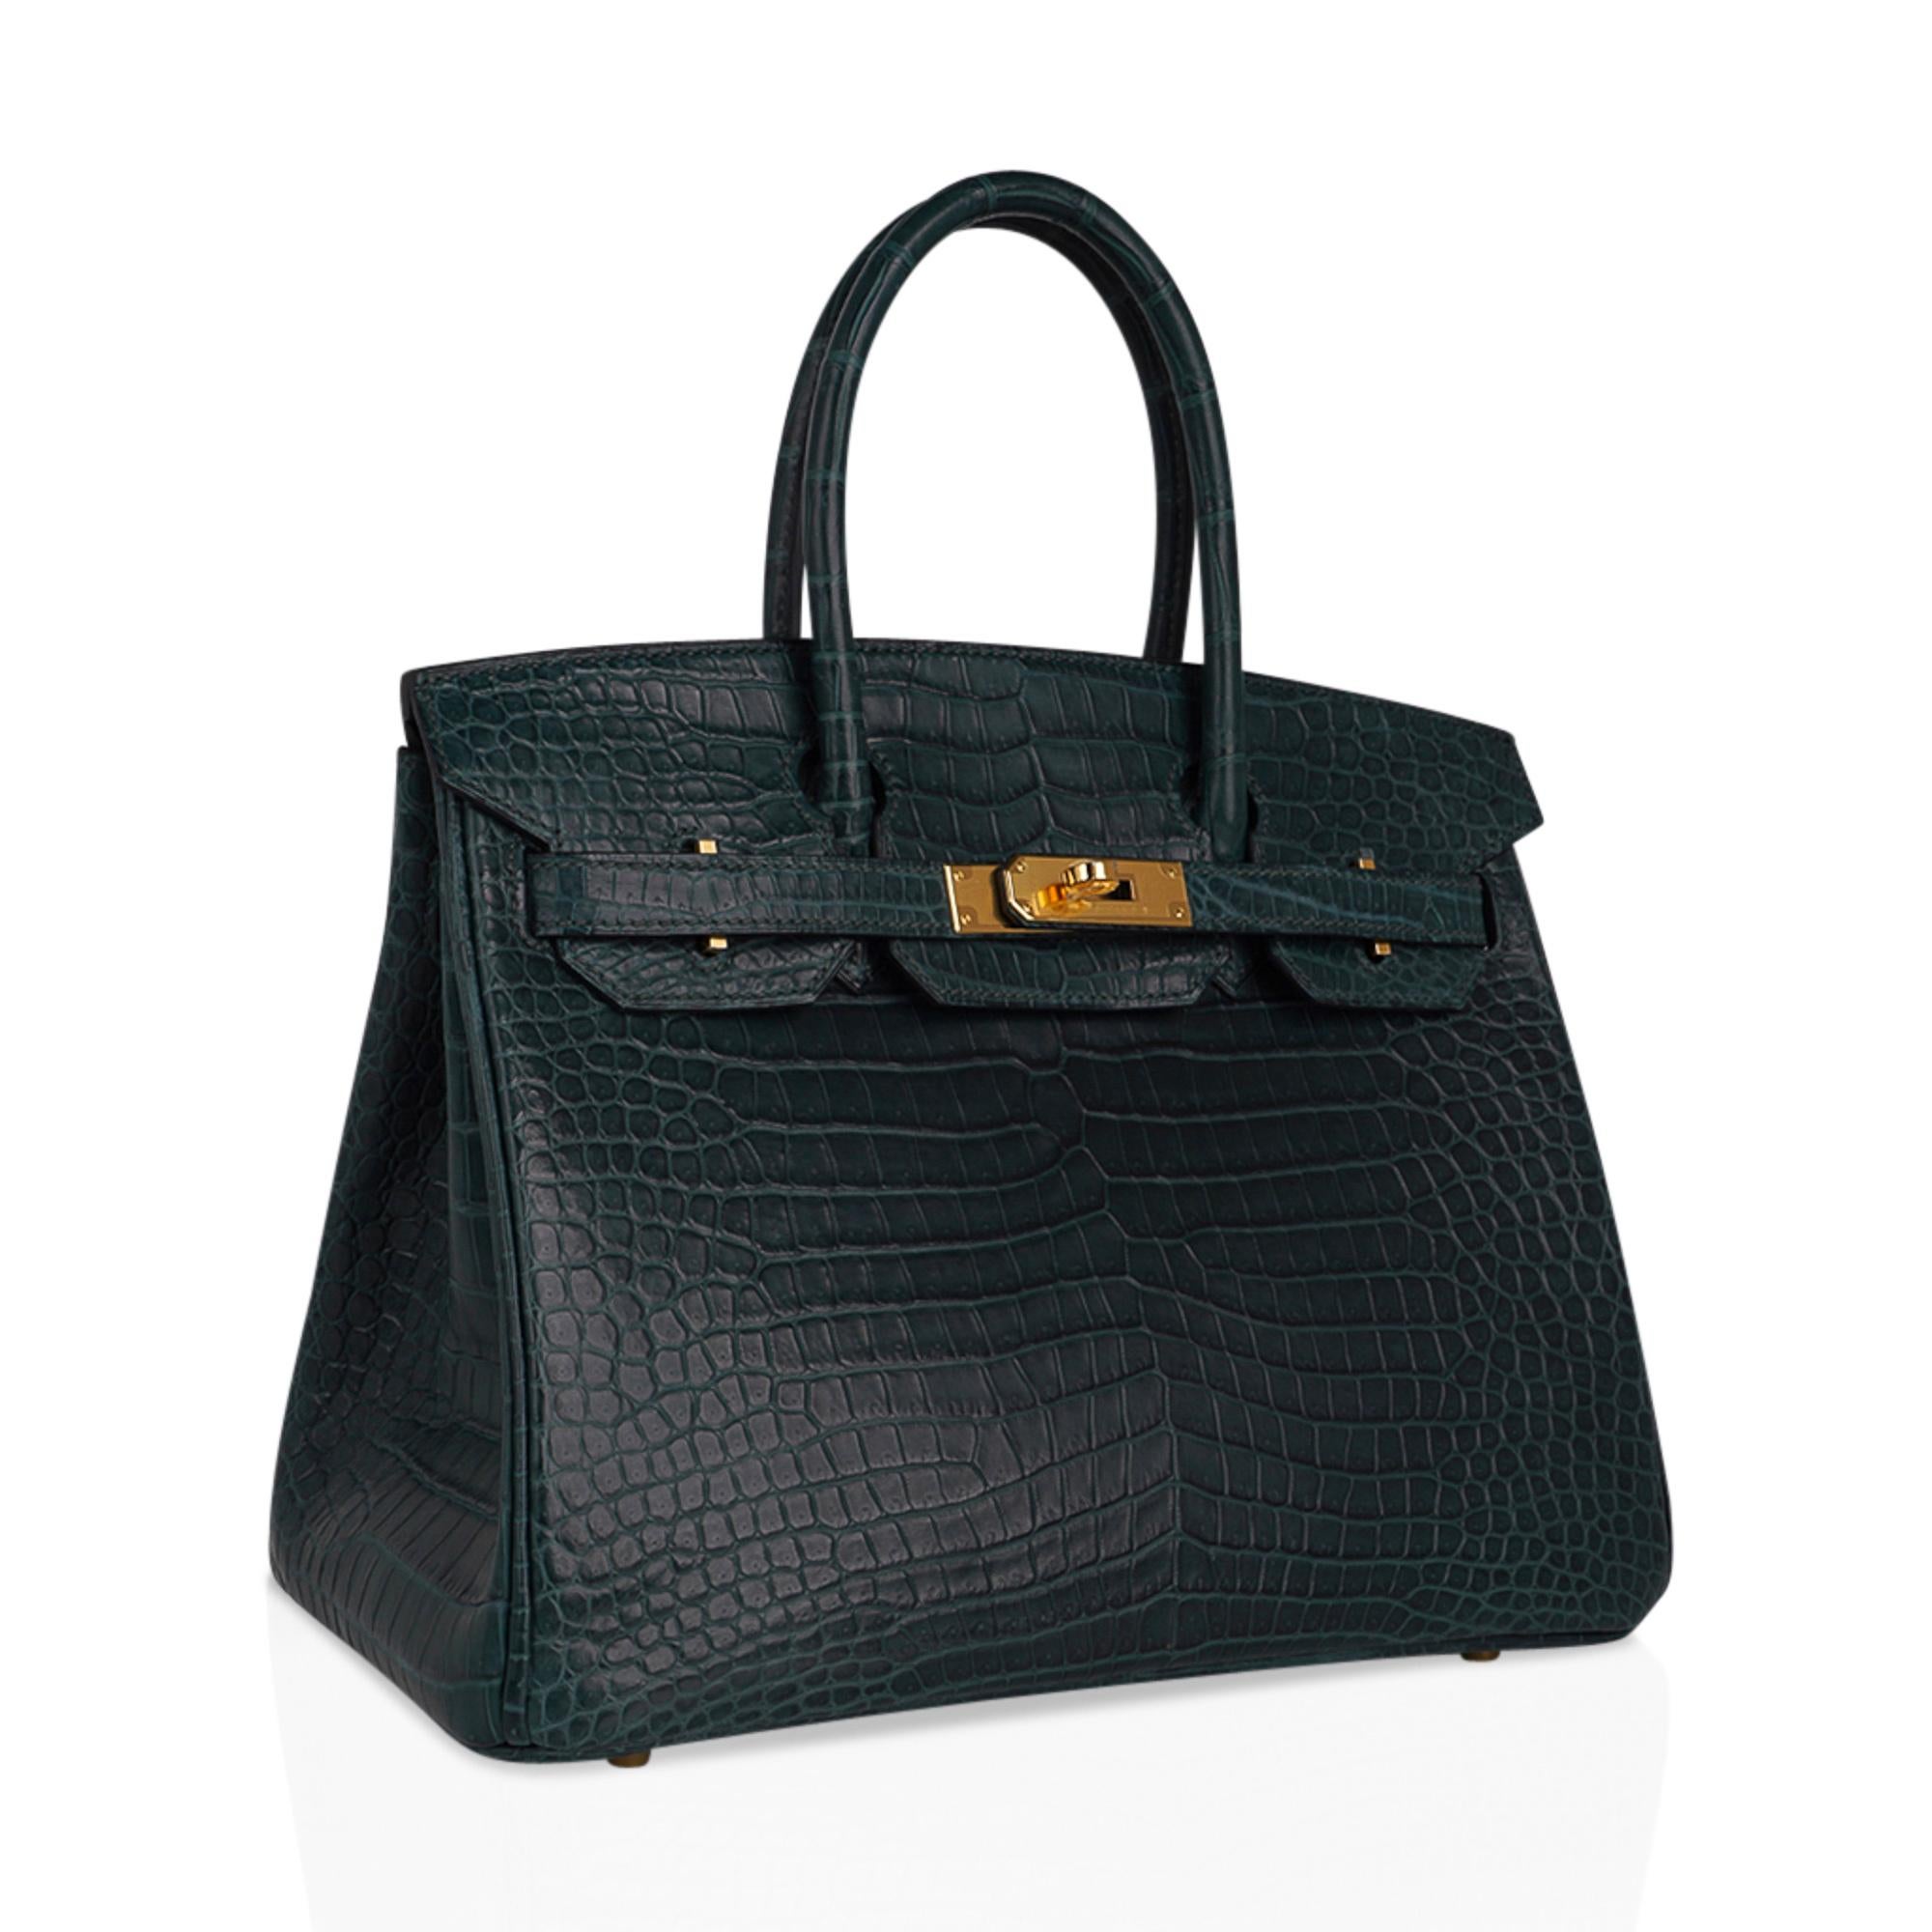 Mightychic offers an exquisite Hermes Birkin 30 bag is featured in in lush deep Vert Fonce Porosus Crocodile. 
This exotic Hermes Birkin bag in matte Porosus crocodile skin has magnificent scales.
The most exclusive and coveted Porosus skin is